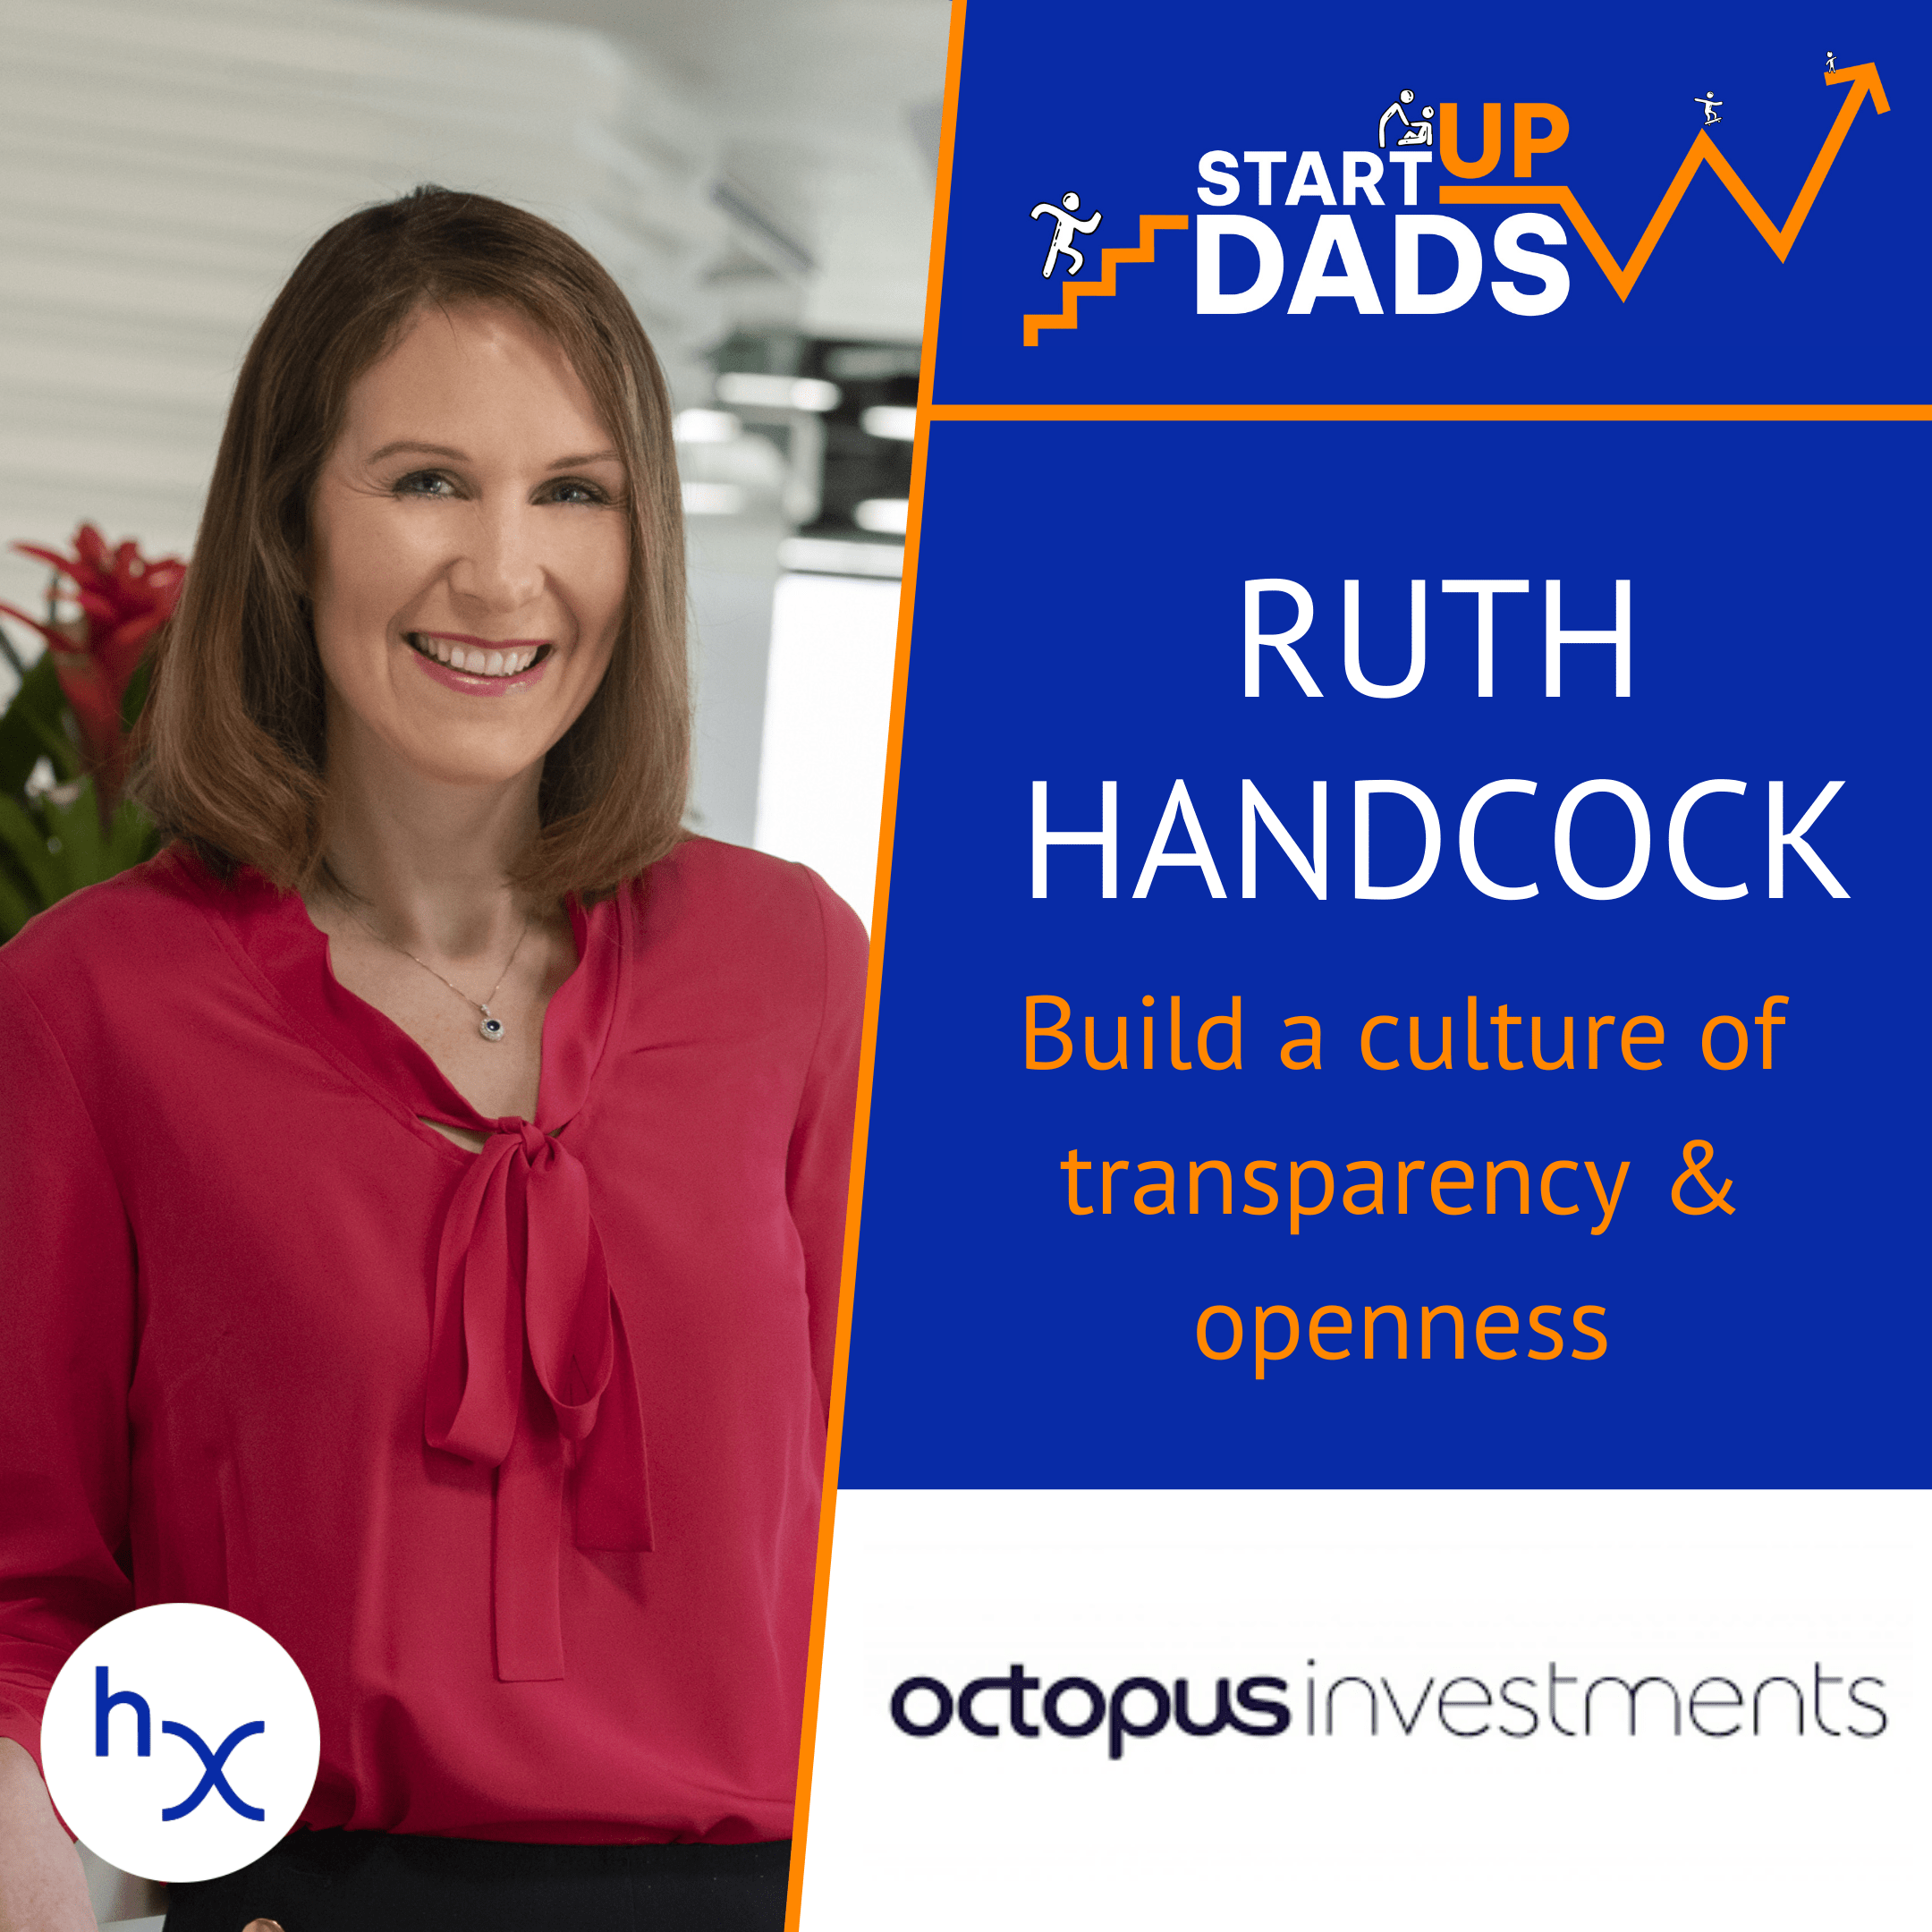 Build a culture of transparency & openness: Ruth Handcock, Octopus Investments